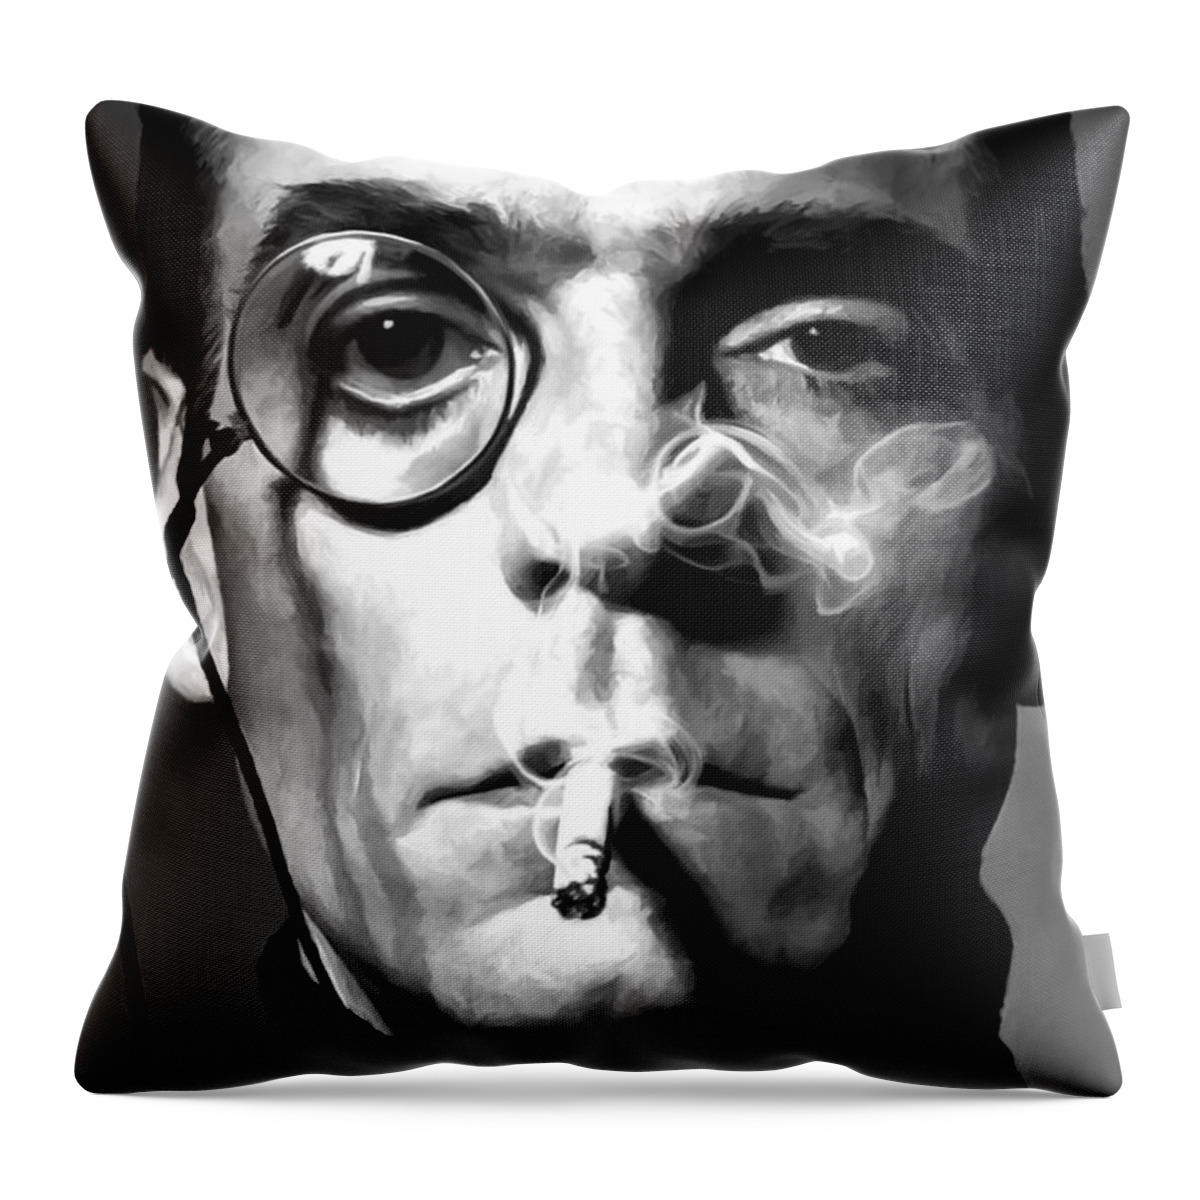 Jeremy Irons Throw Pillow featuring the digital art Jeremy Irons Portrait by Gabriel T Toro